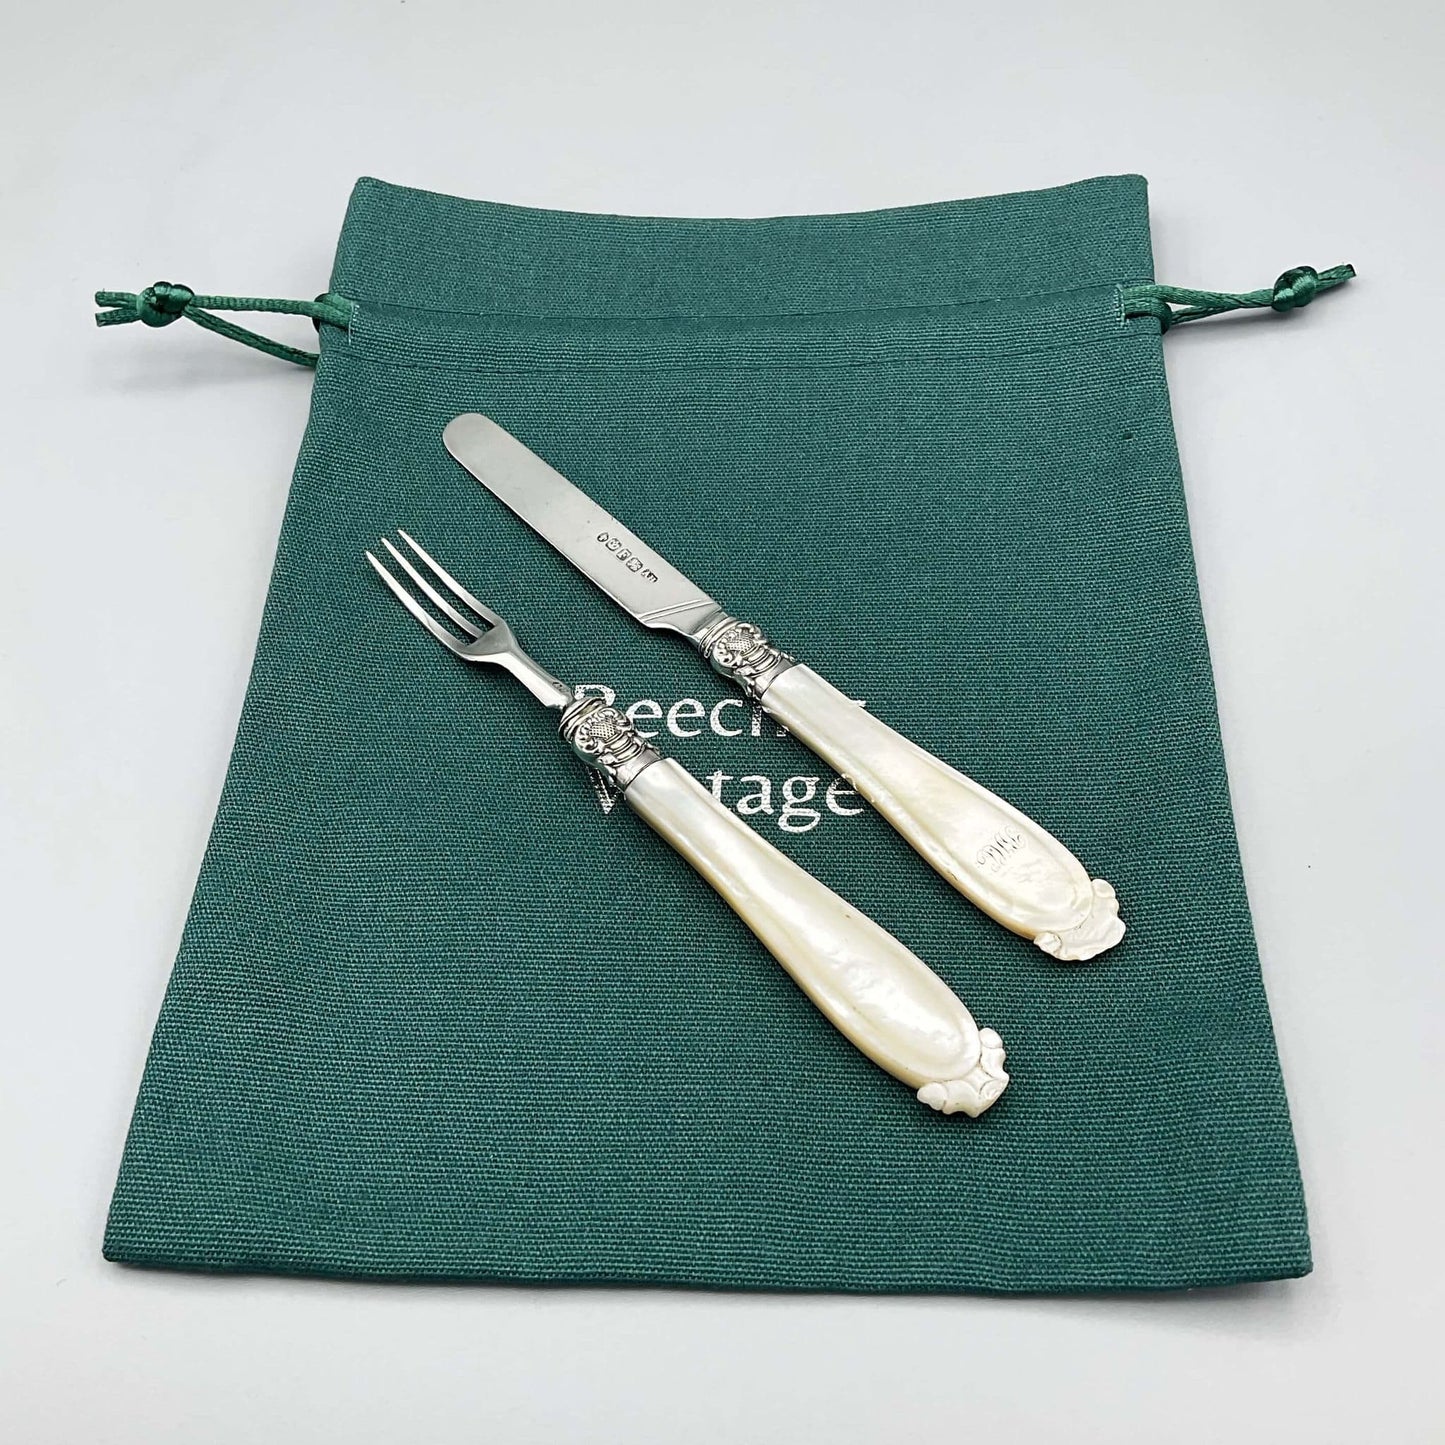 Antique 1894 Victorian Silver Knife and Fork Set, Campaign Cutlery